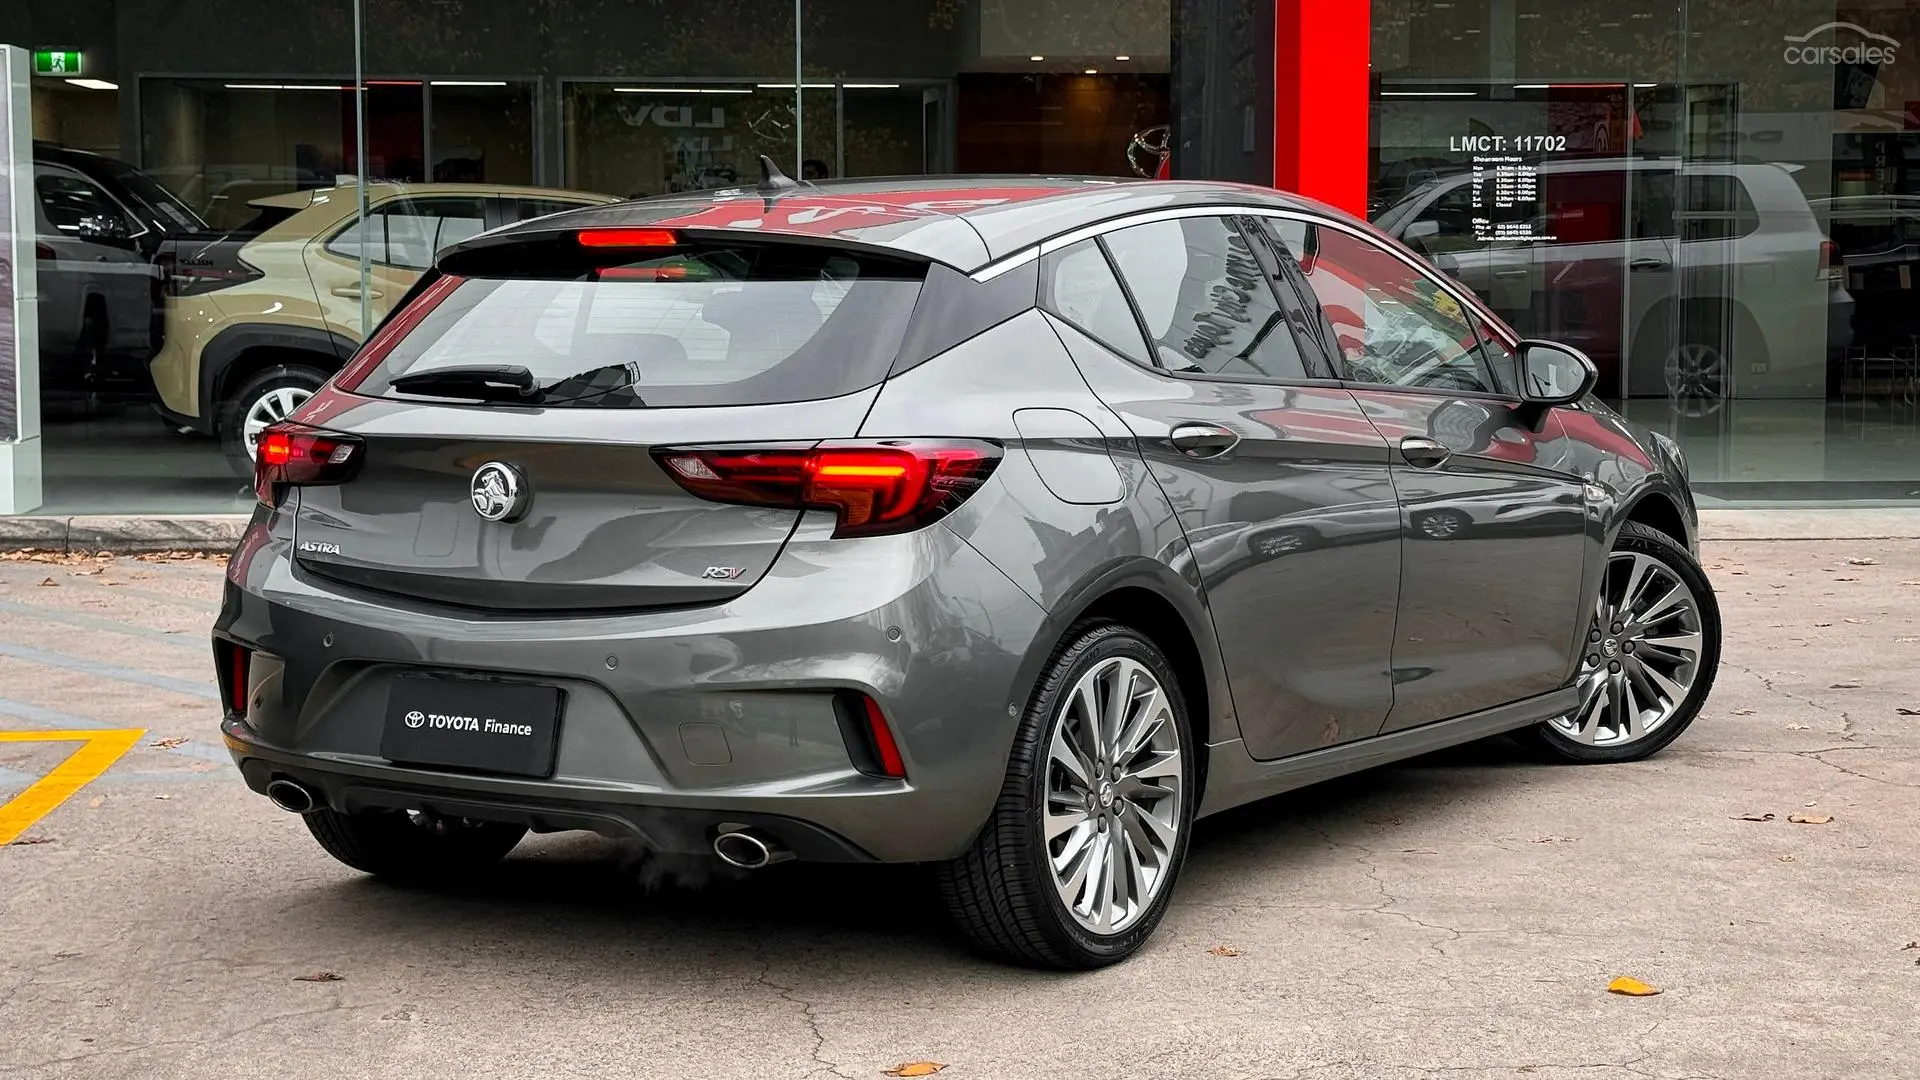 2017 Holden Astra Image 6